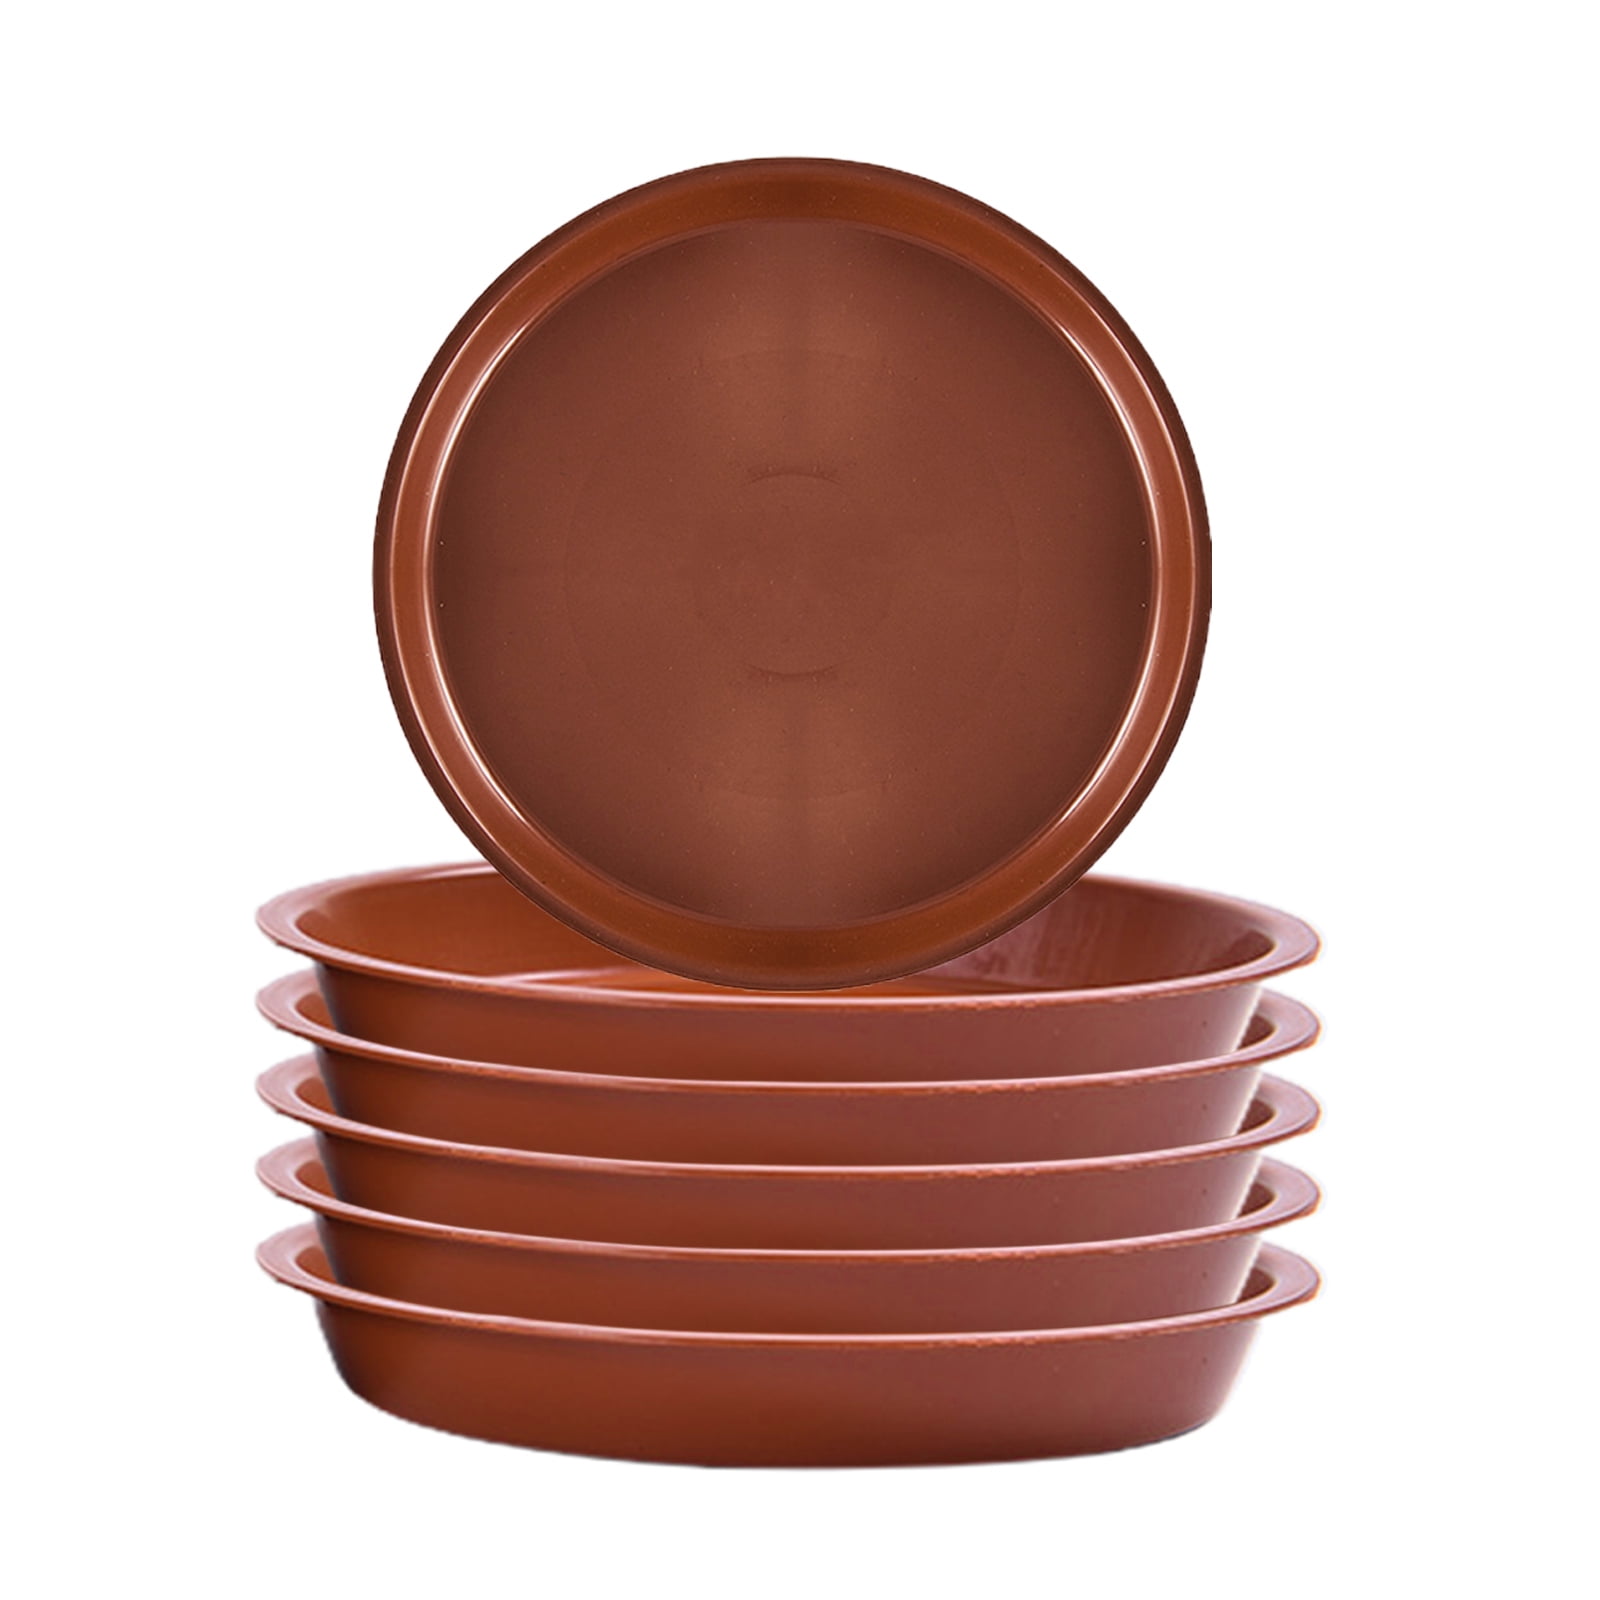 6 Pcs 11.8 Inch Plant Saucer Drip Trays,Plastic Plant Pots Saucers,Durable Flower Pot Saucer for Indoors Outdoor Garden,Brown